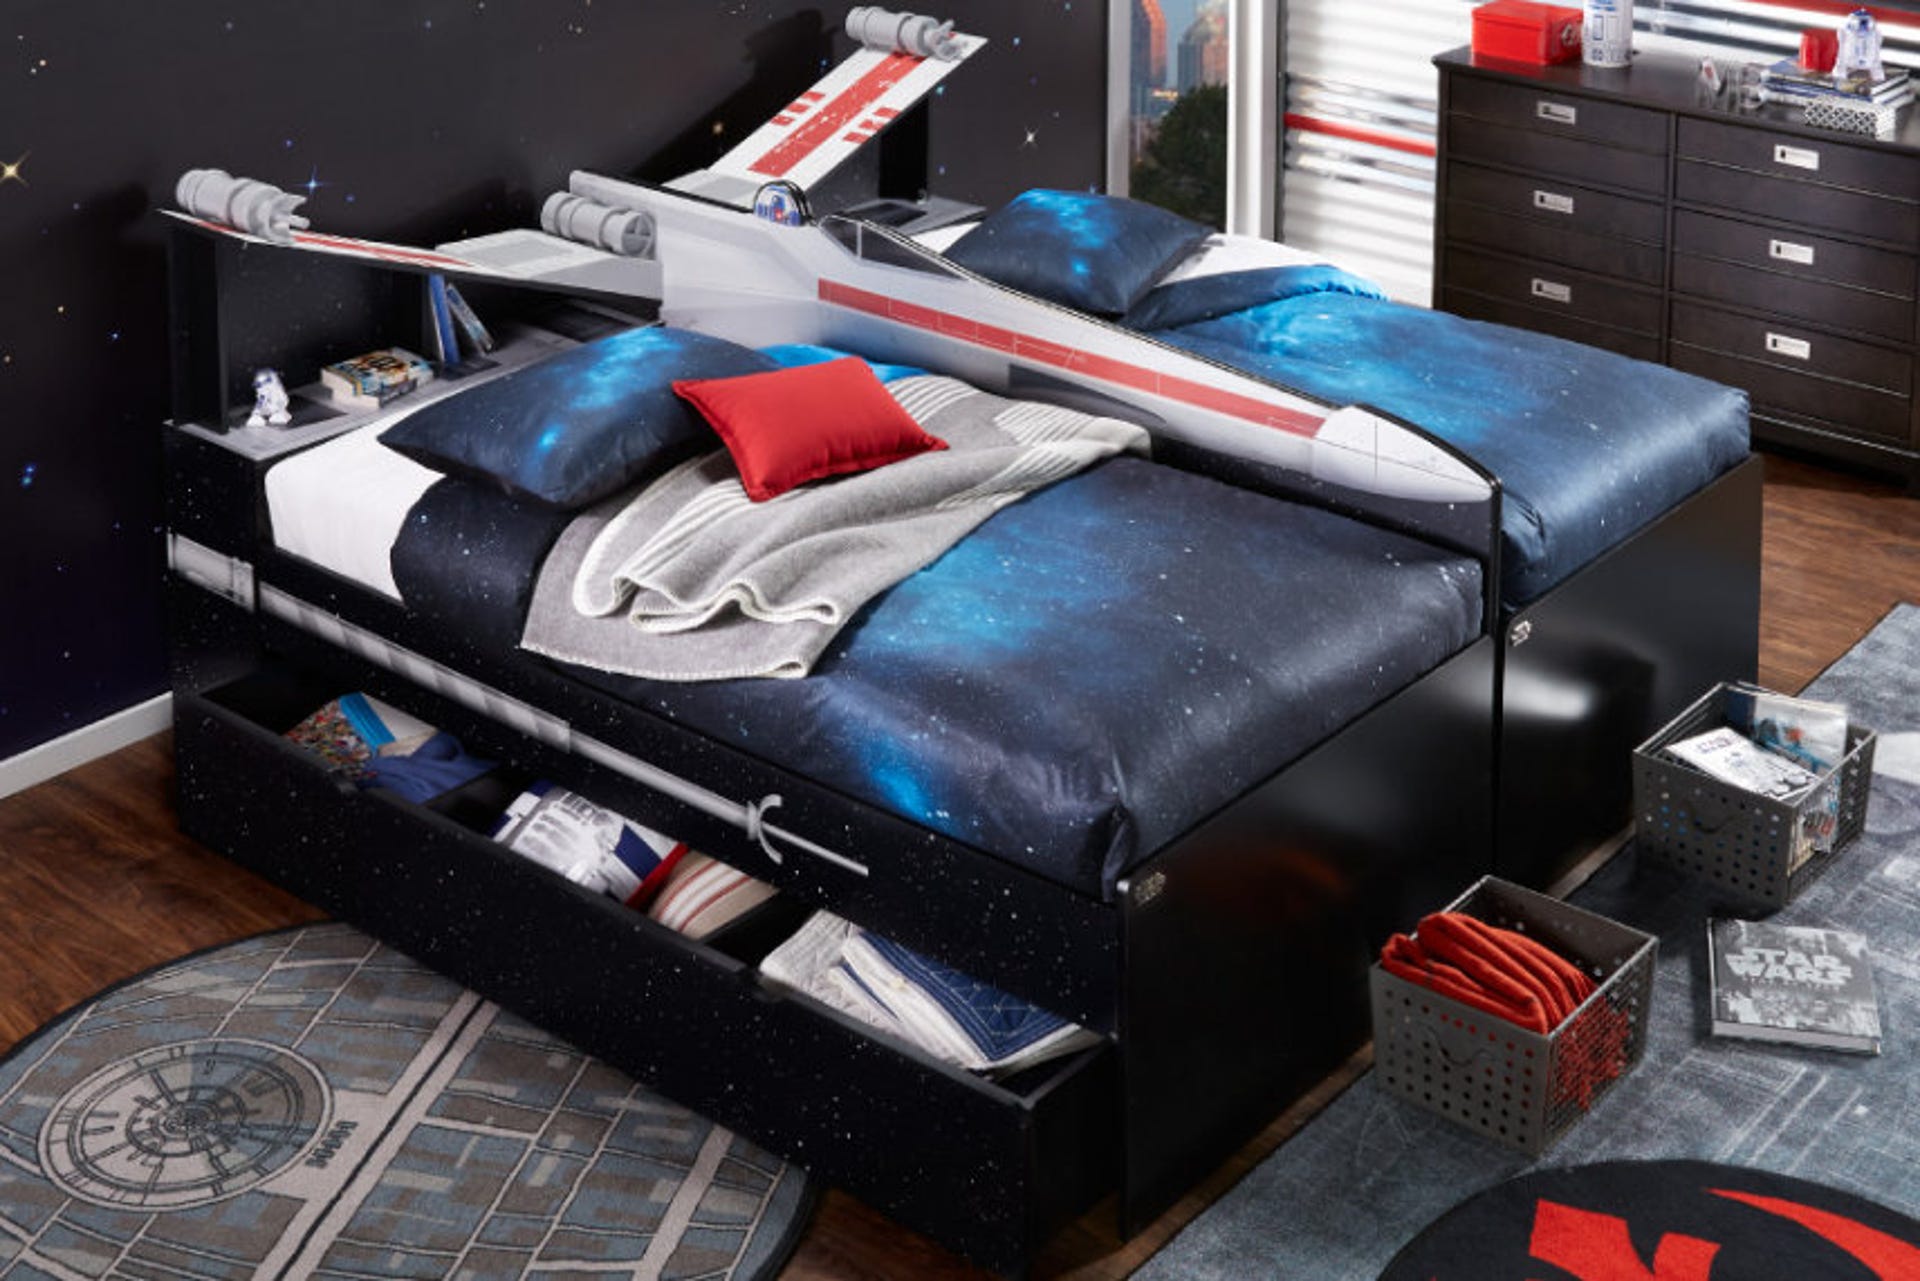 X-wing bed